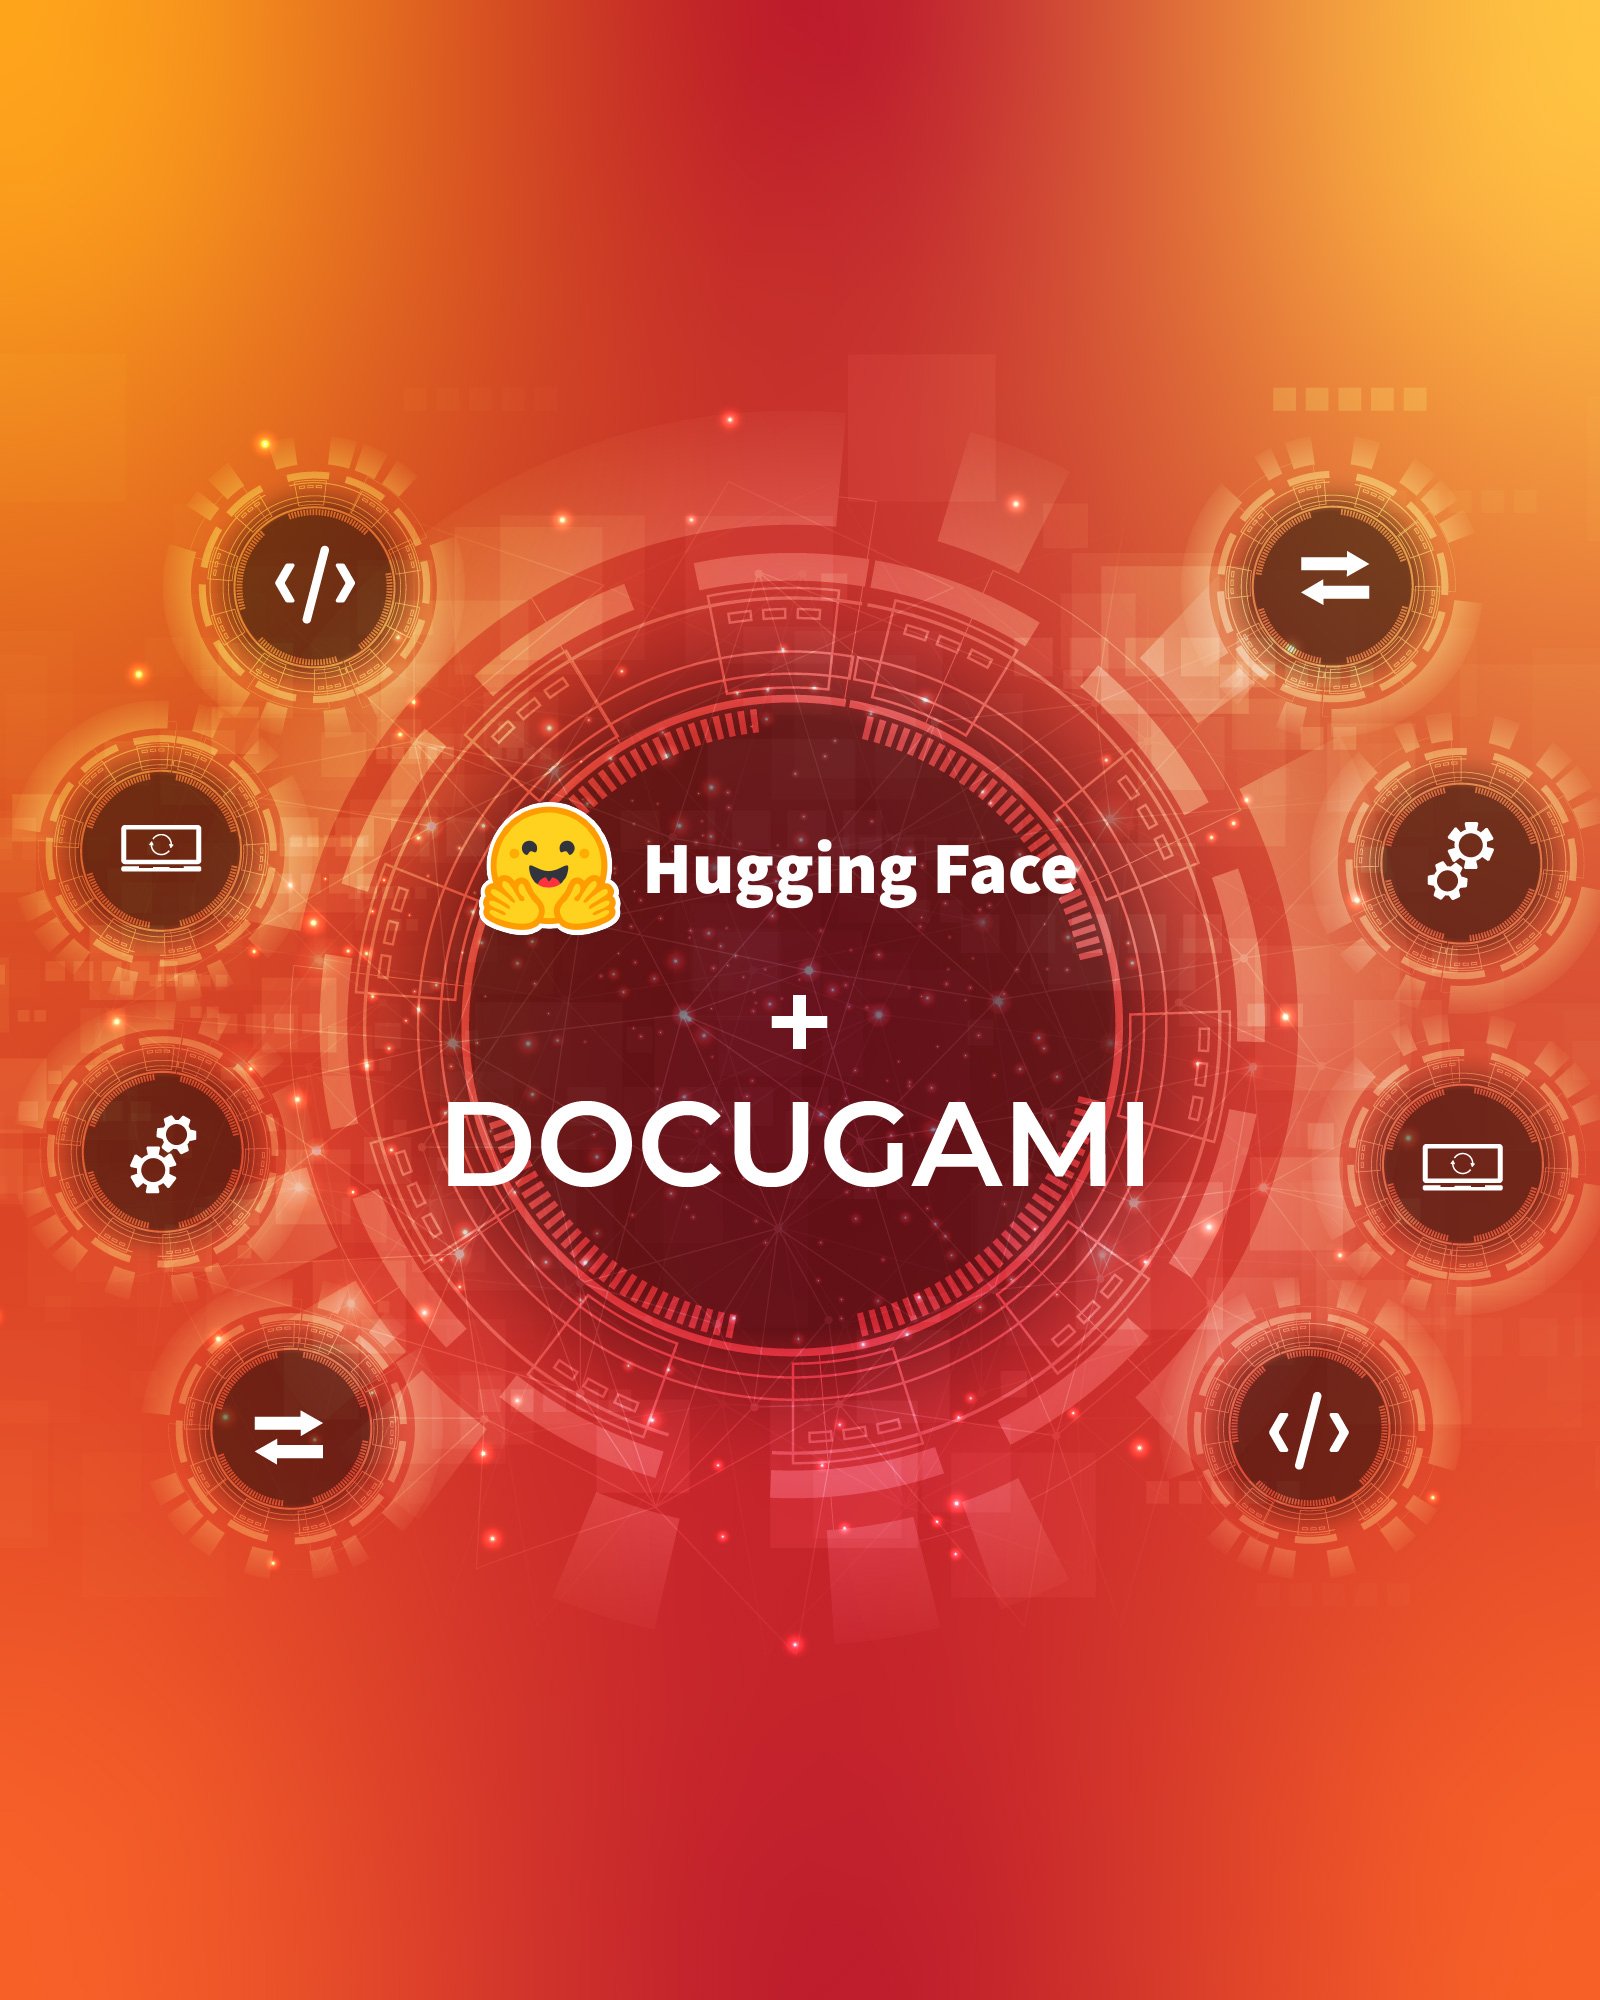 A digital image showing Hugging Face and Docugami in the center, surrounded by a variety of icons representing the ways developers will be able to transform business documents into data, harnessing the power of AI for business users.